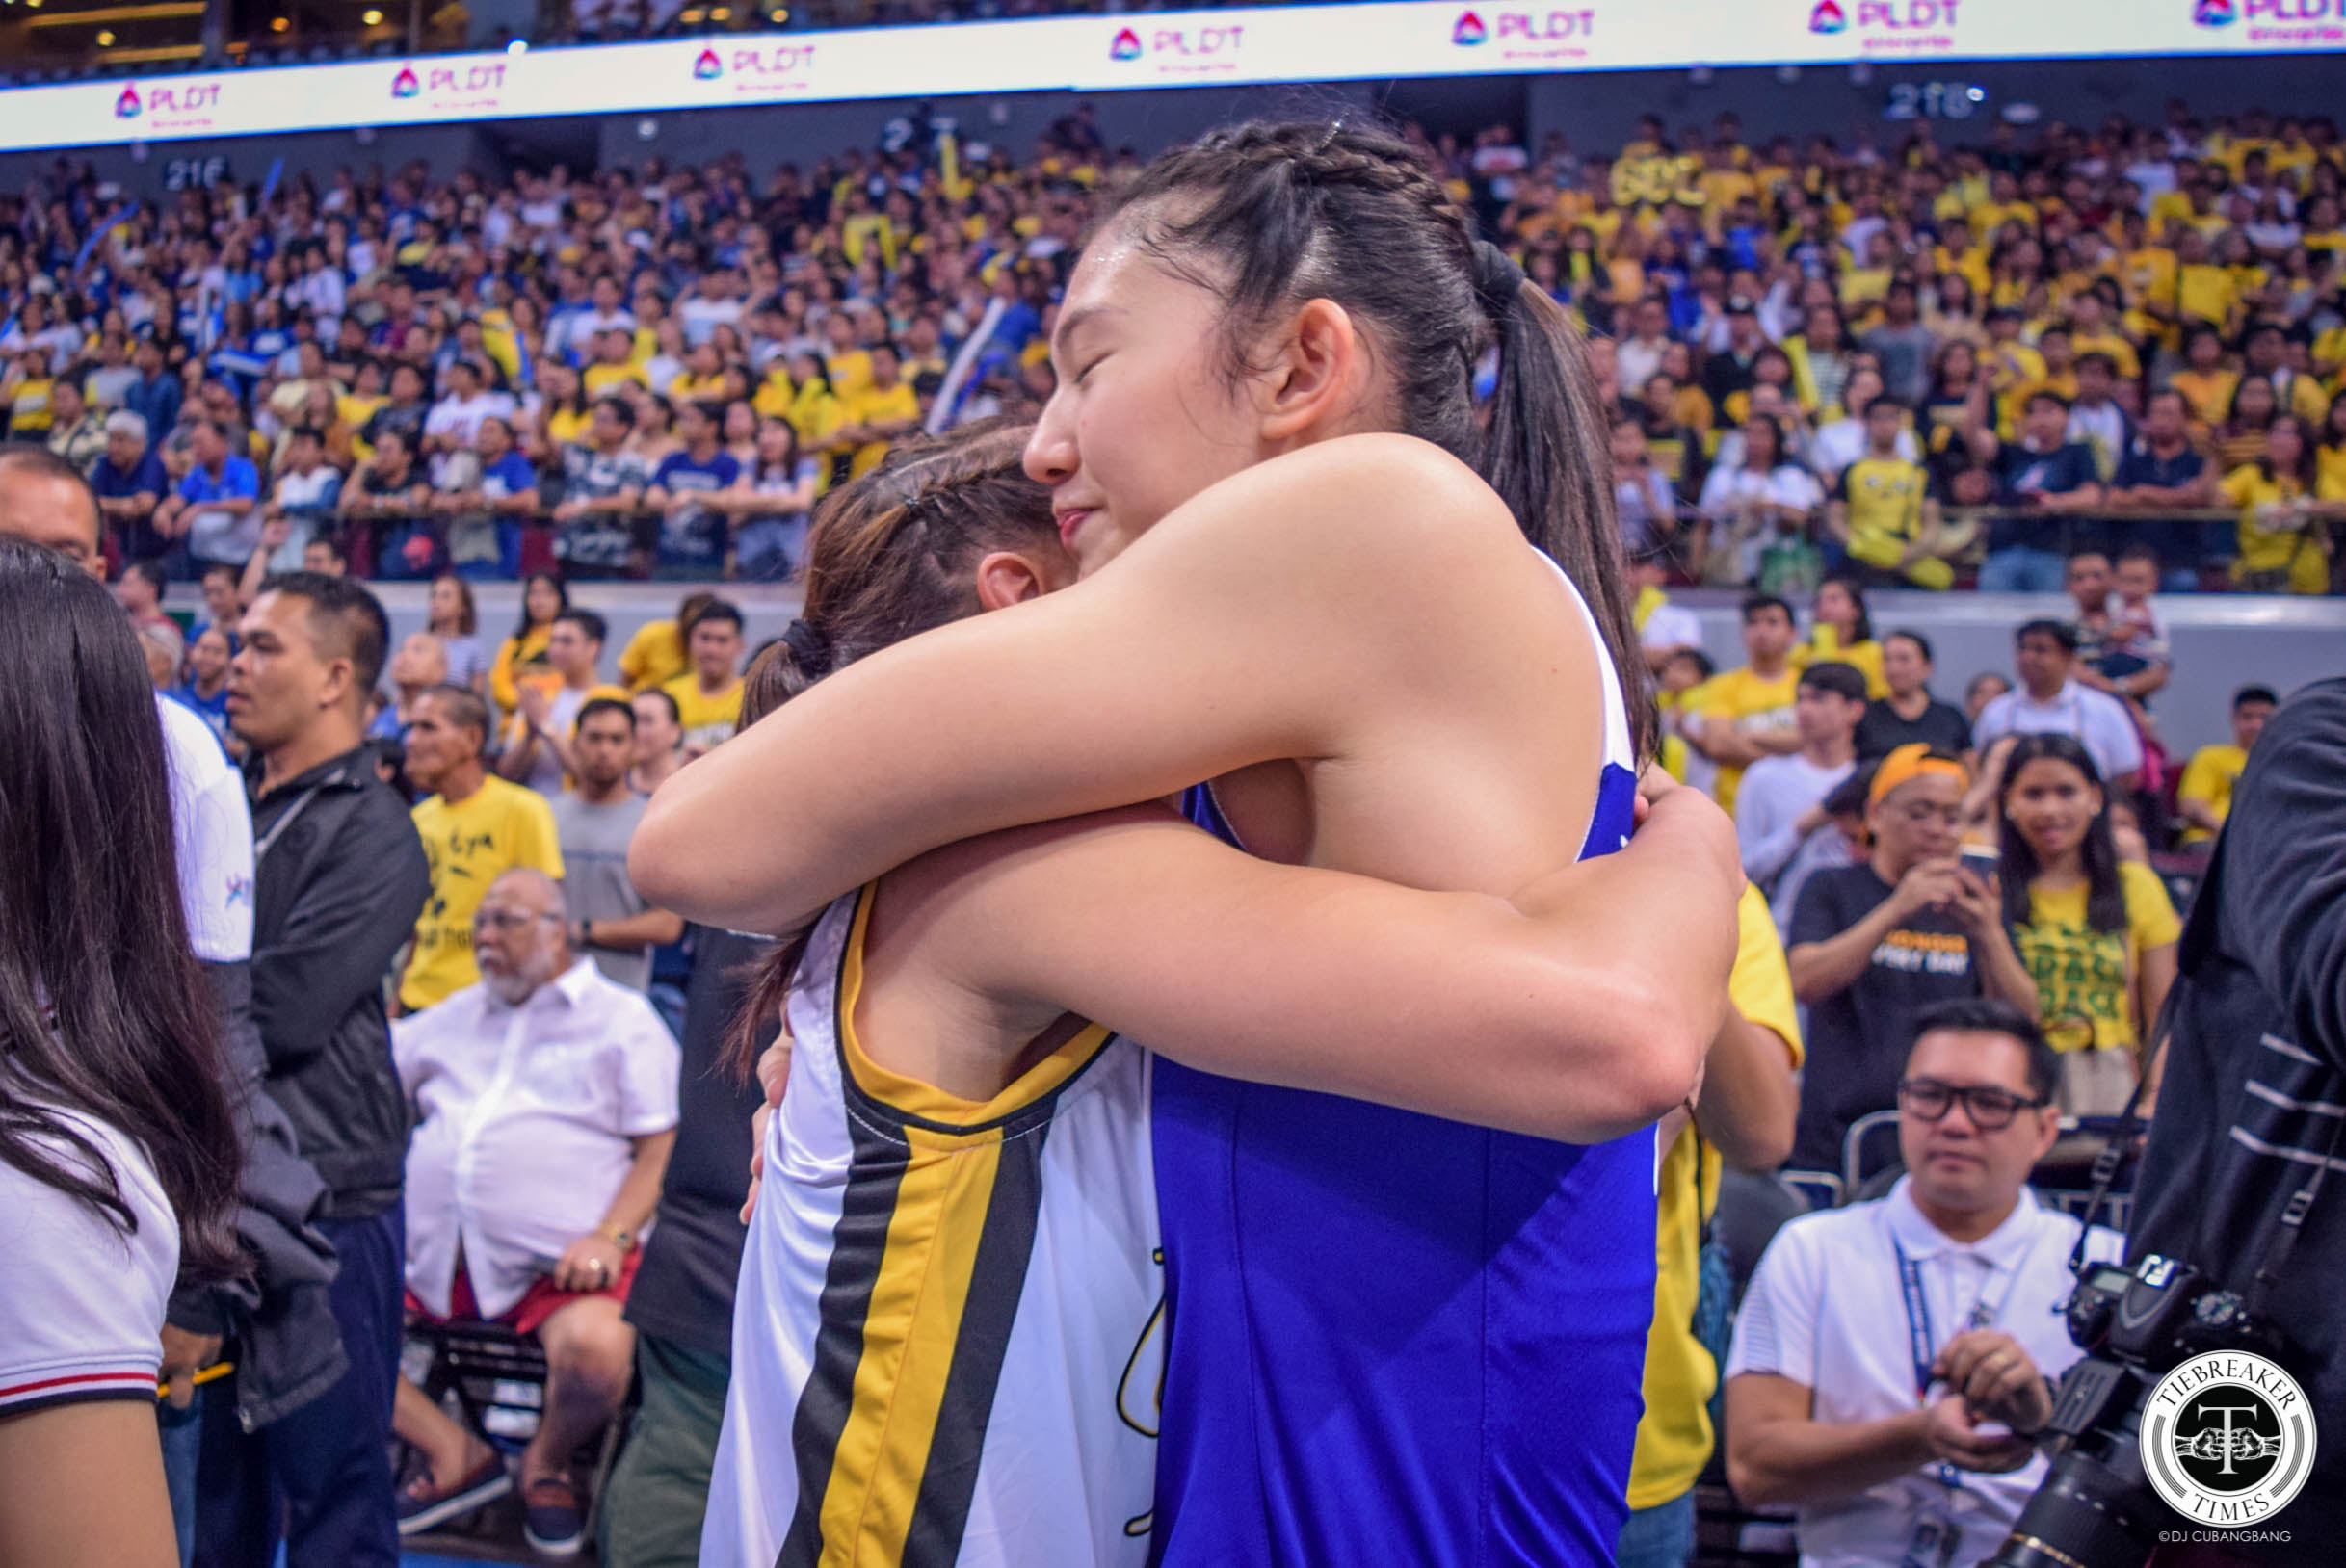 UAAP-Season-81-Womens-Volleyball-Finals-Game-3-ADMU-def-UST-de-leon-hugs-rondina Ateneo Lady Eagles in unison: 'Sisi Rondina made everything so much harder' ADMU News UAAP UST Volleyball  - philippine sports news